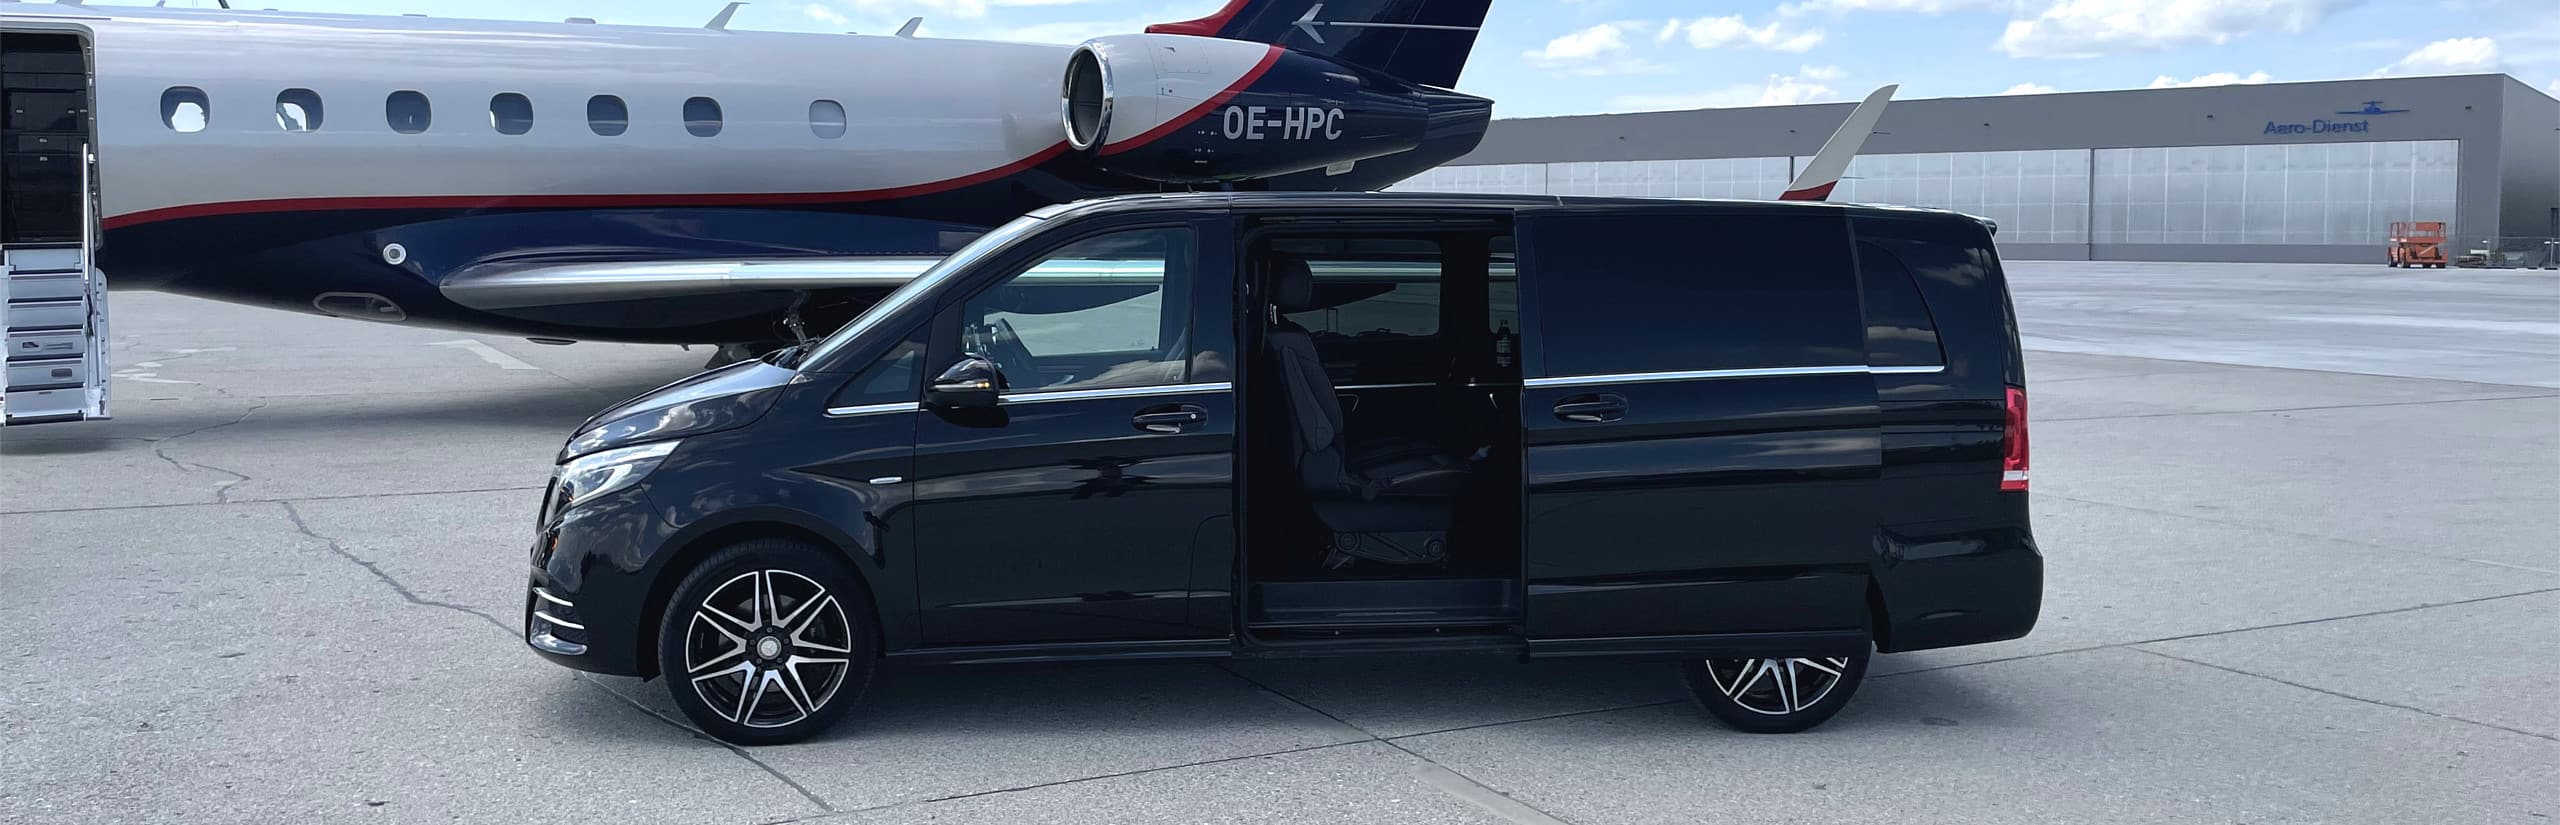 VIP van hire 7-seater – Munich and Germany